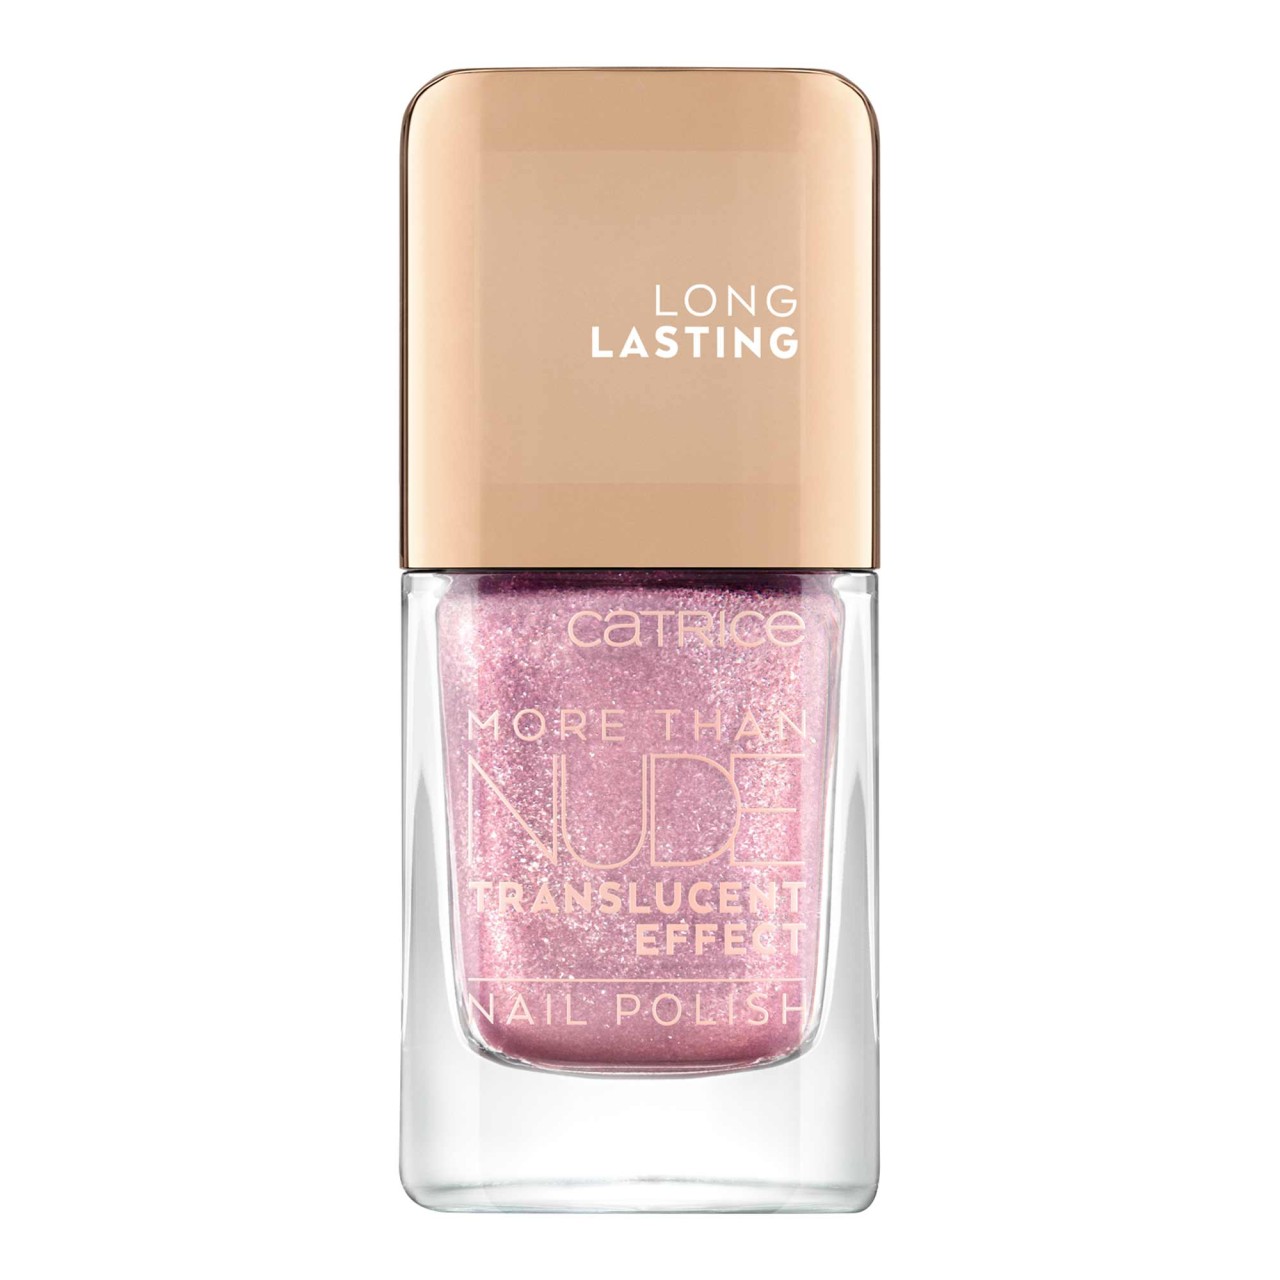 CATRICE - More Than Nude Nail Polish Translucent Effect -  Danc Queen